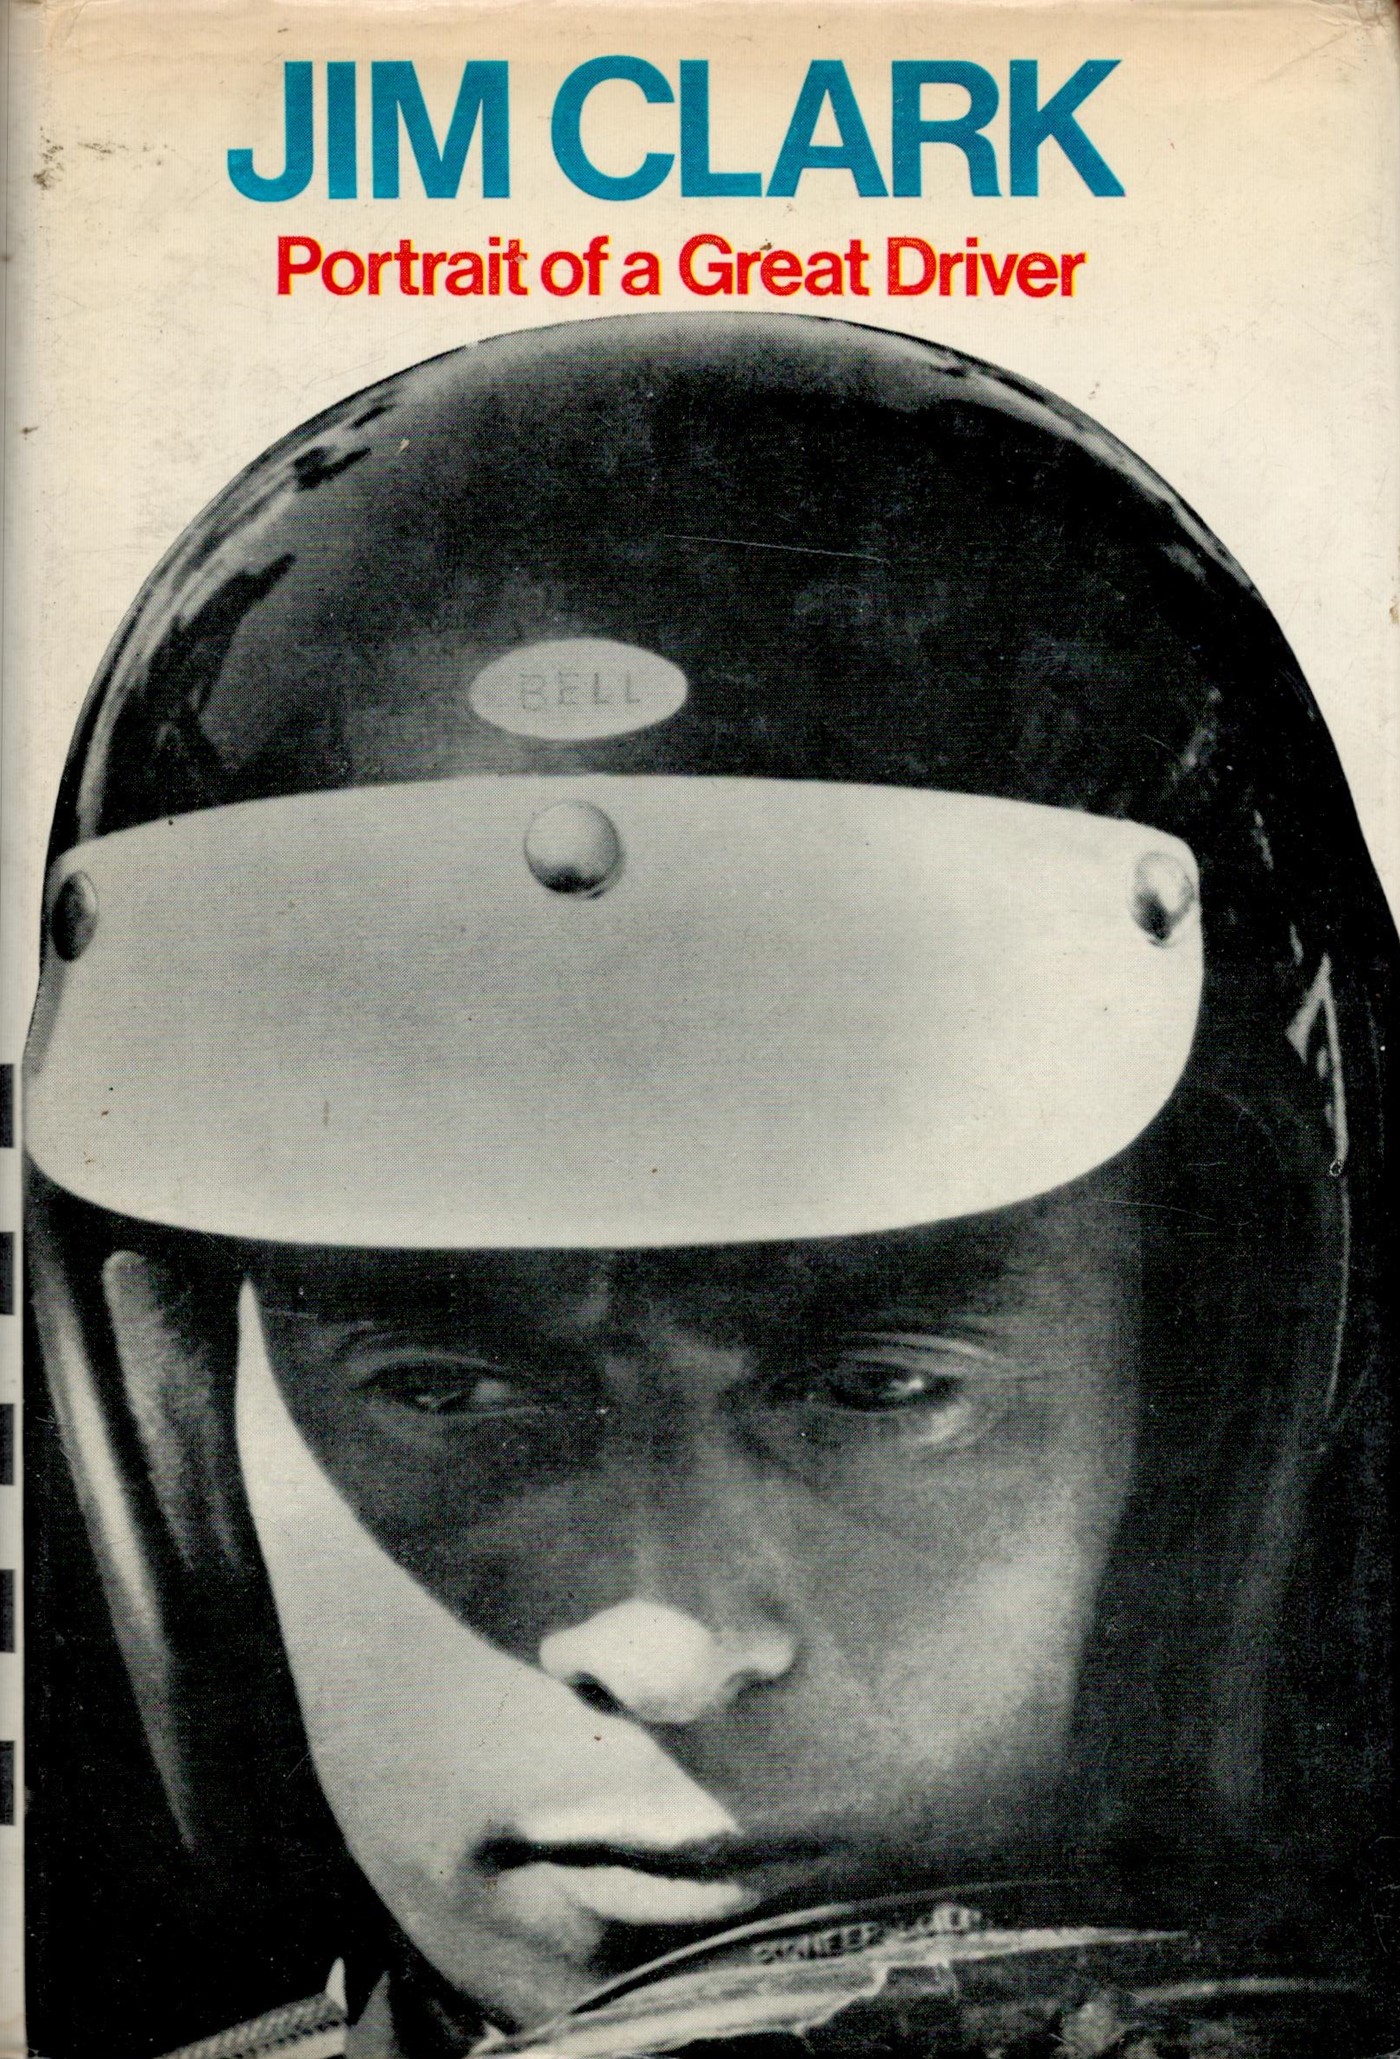 Jim Clark Portrait of A Great Driver by Graham Gauld Hardback Book 1968 First Edition published by